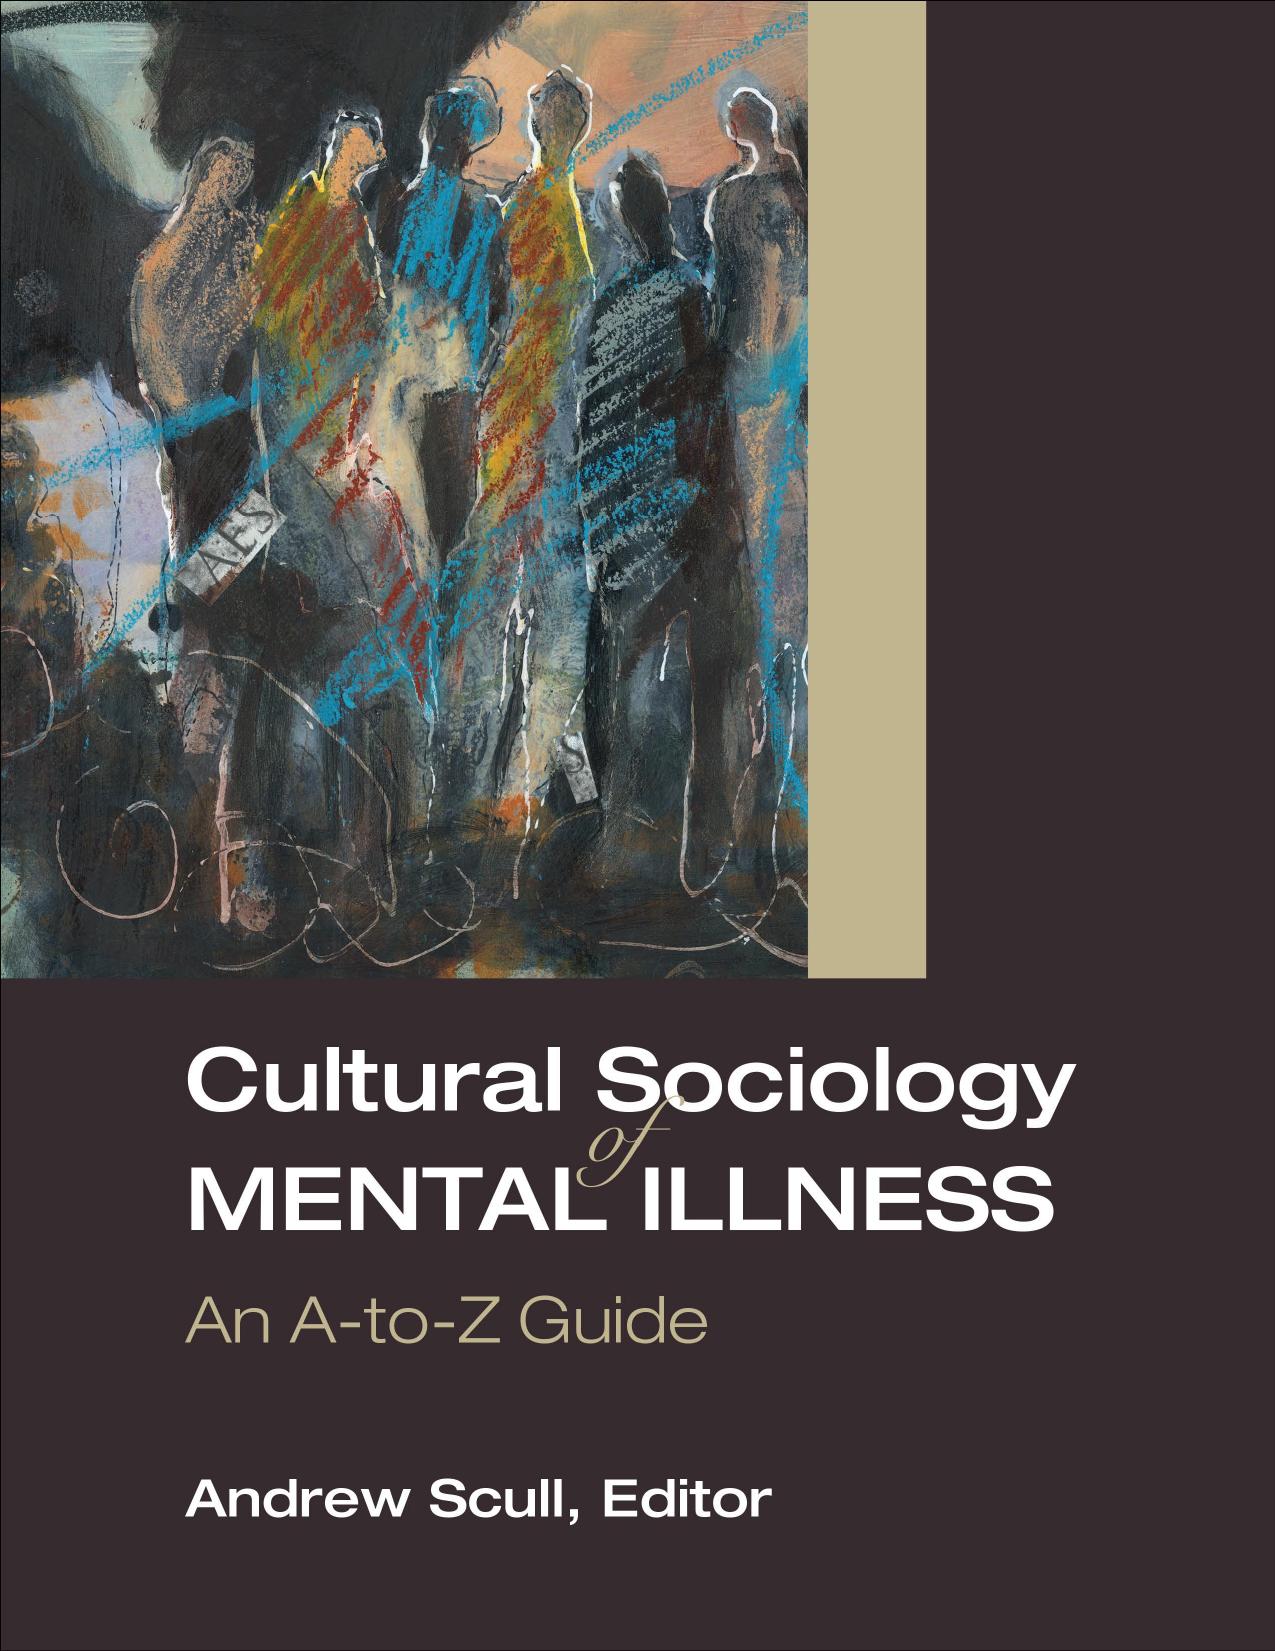 Cultural Sociology of Mental Illness: An A-to-Z Guide